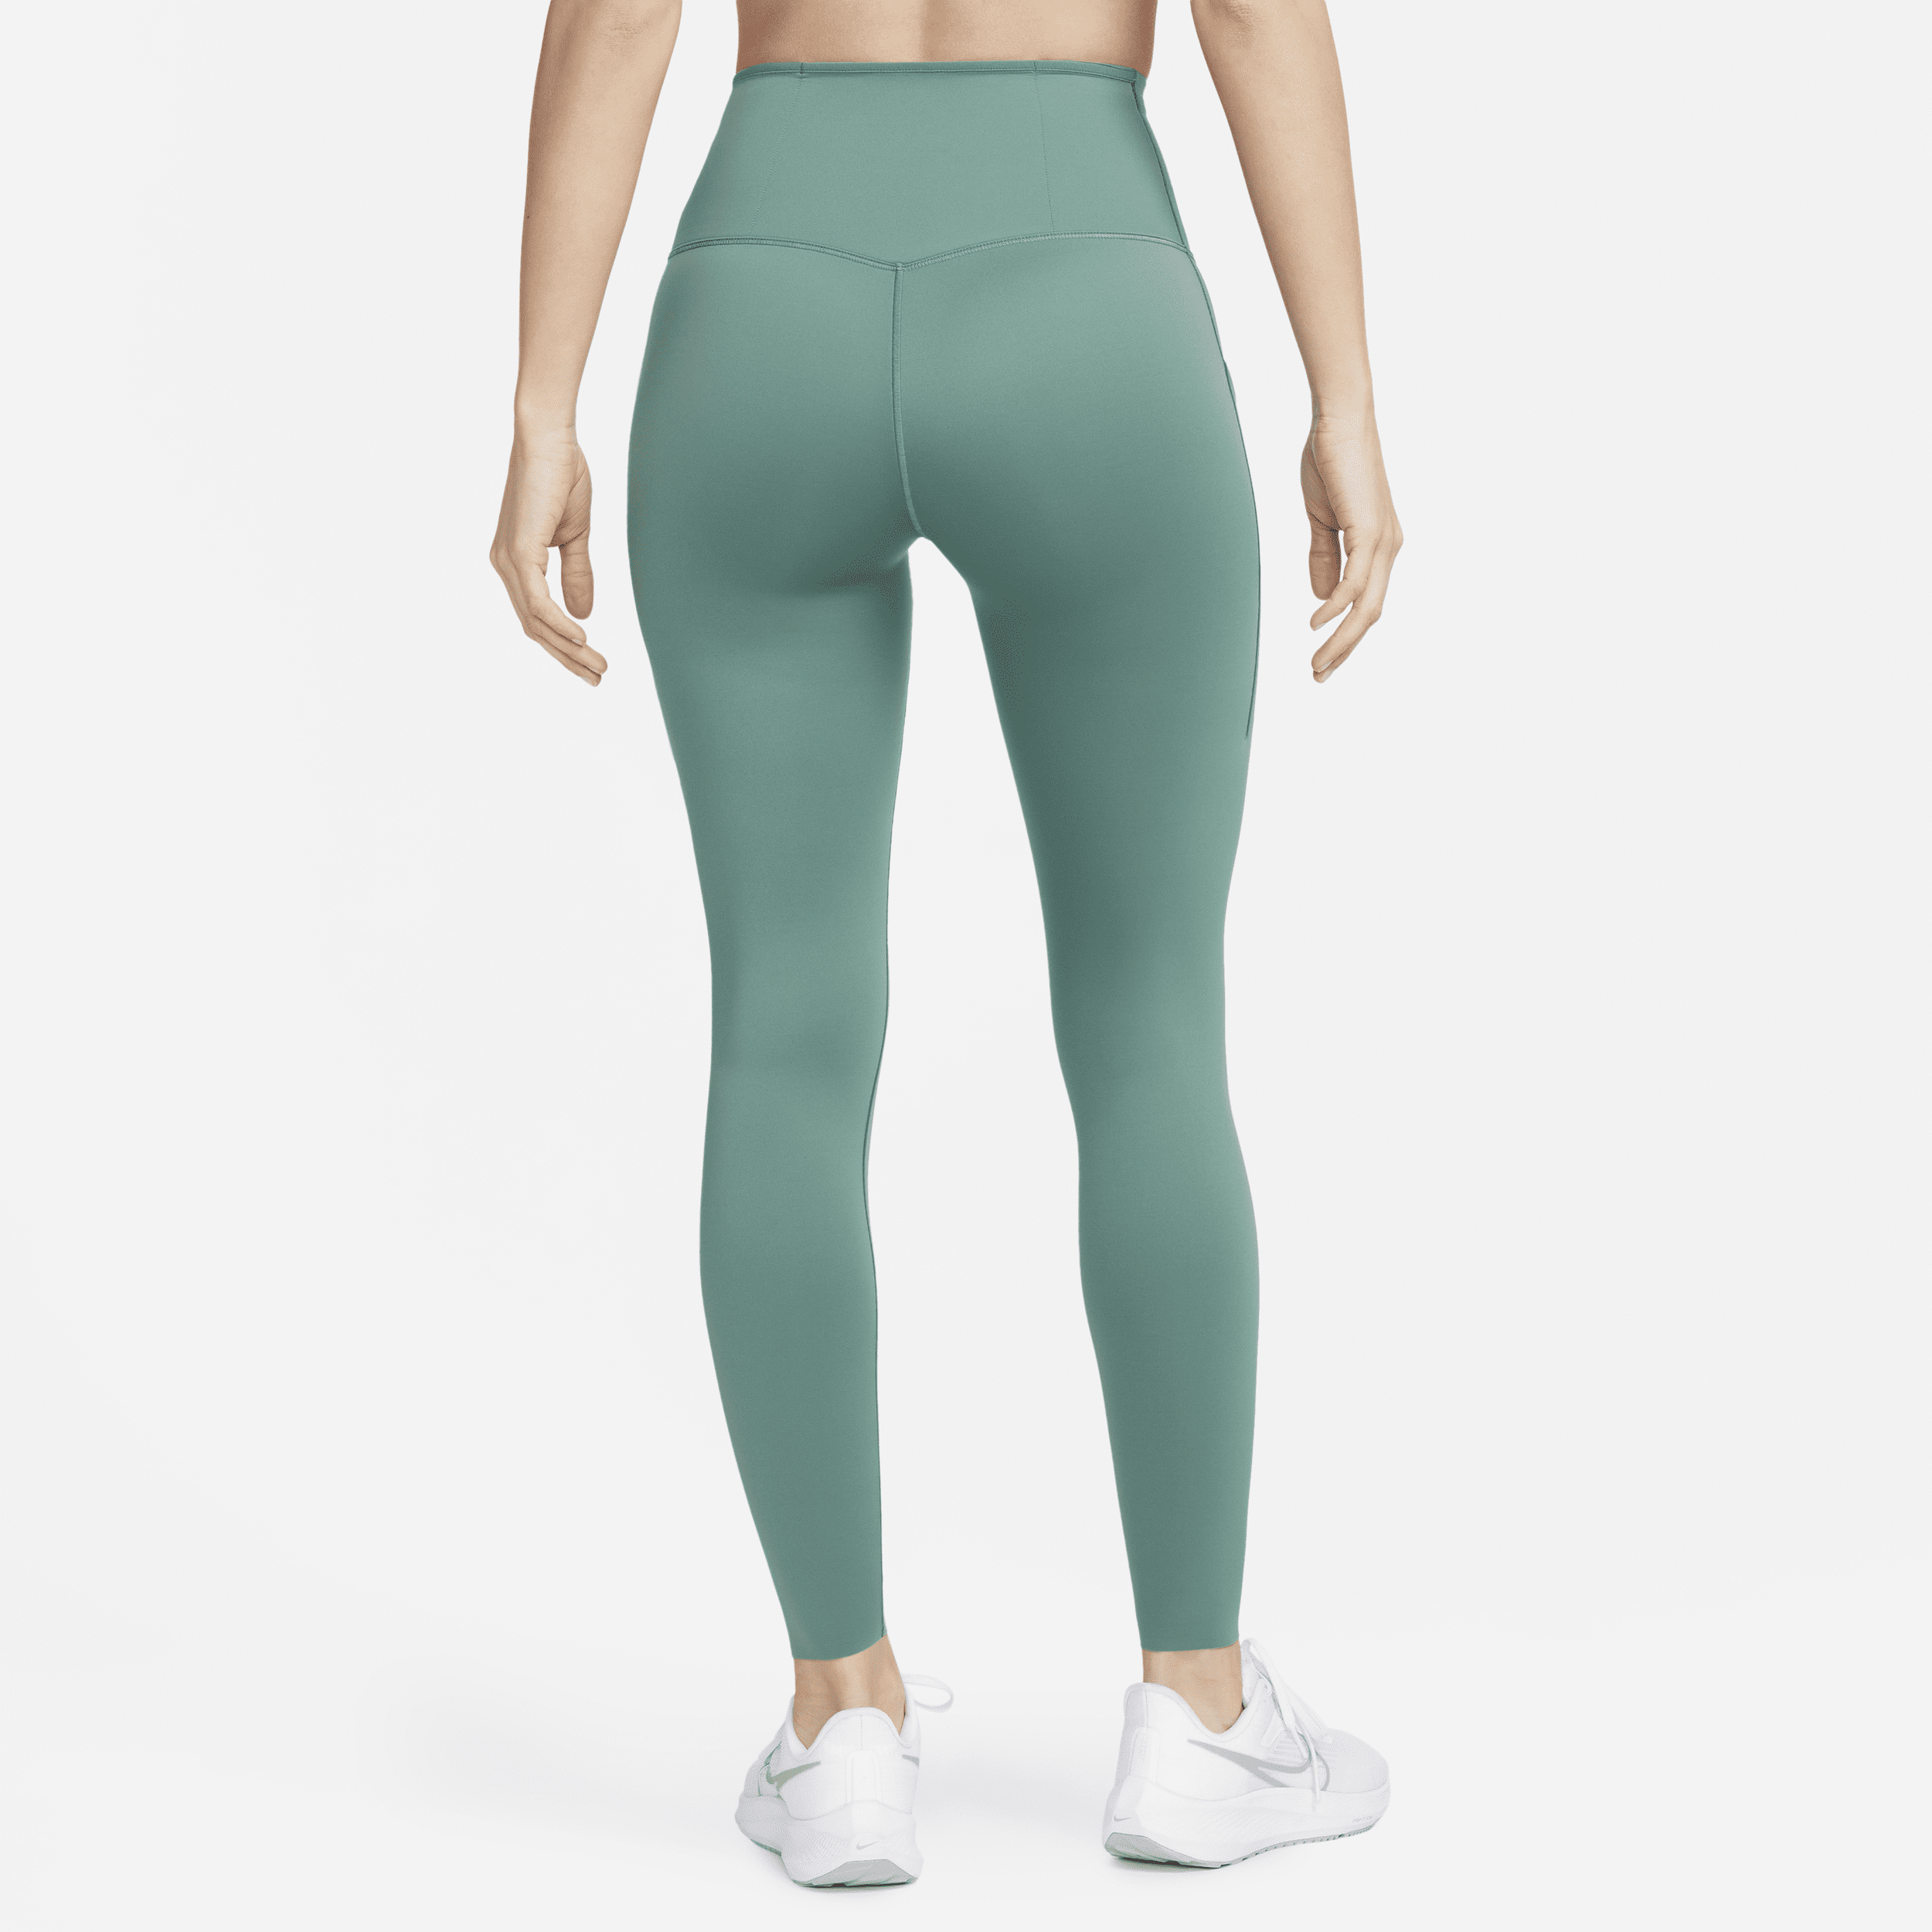 Best Rated Compression Leggings